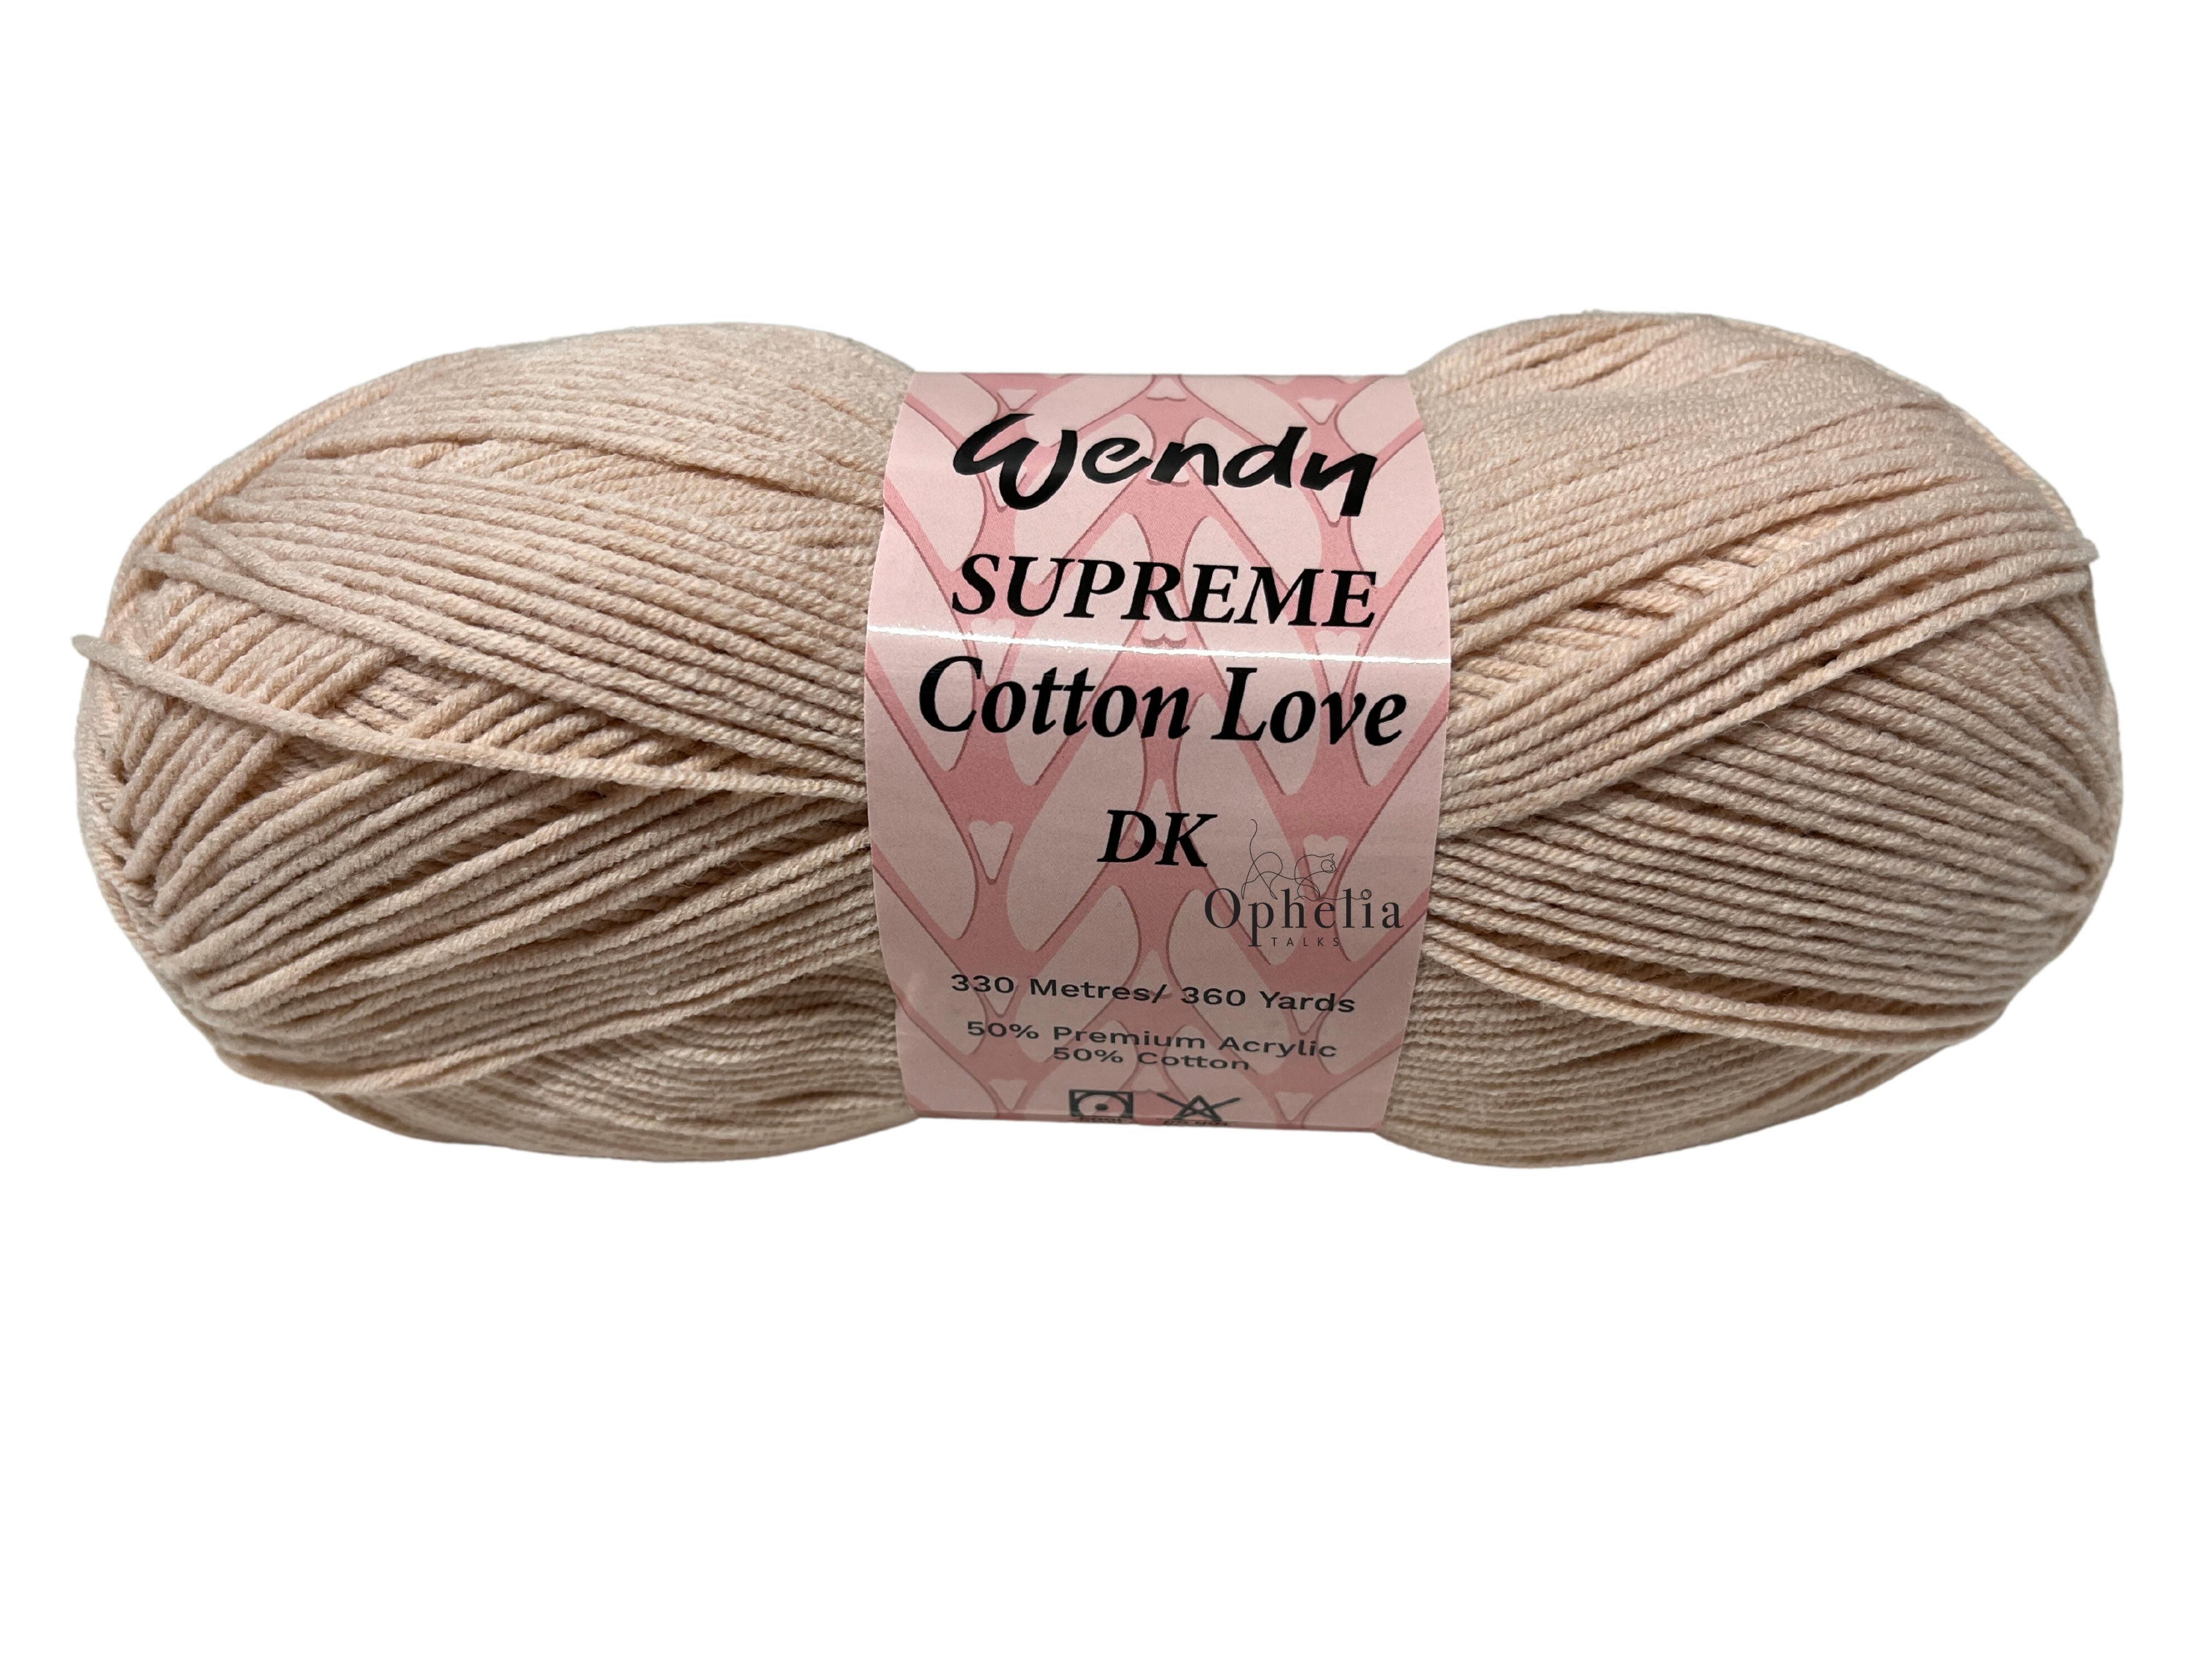 Wendy supreme cotton love in the colour Blush WCT03